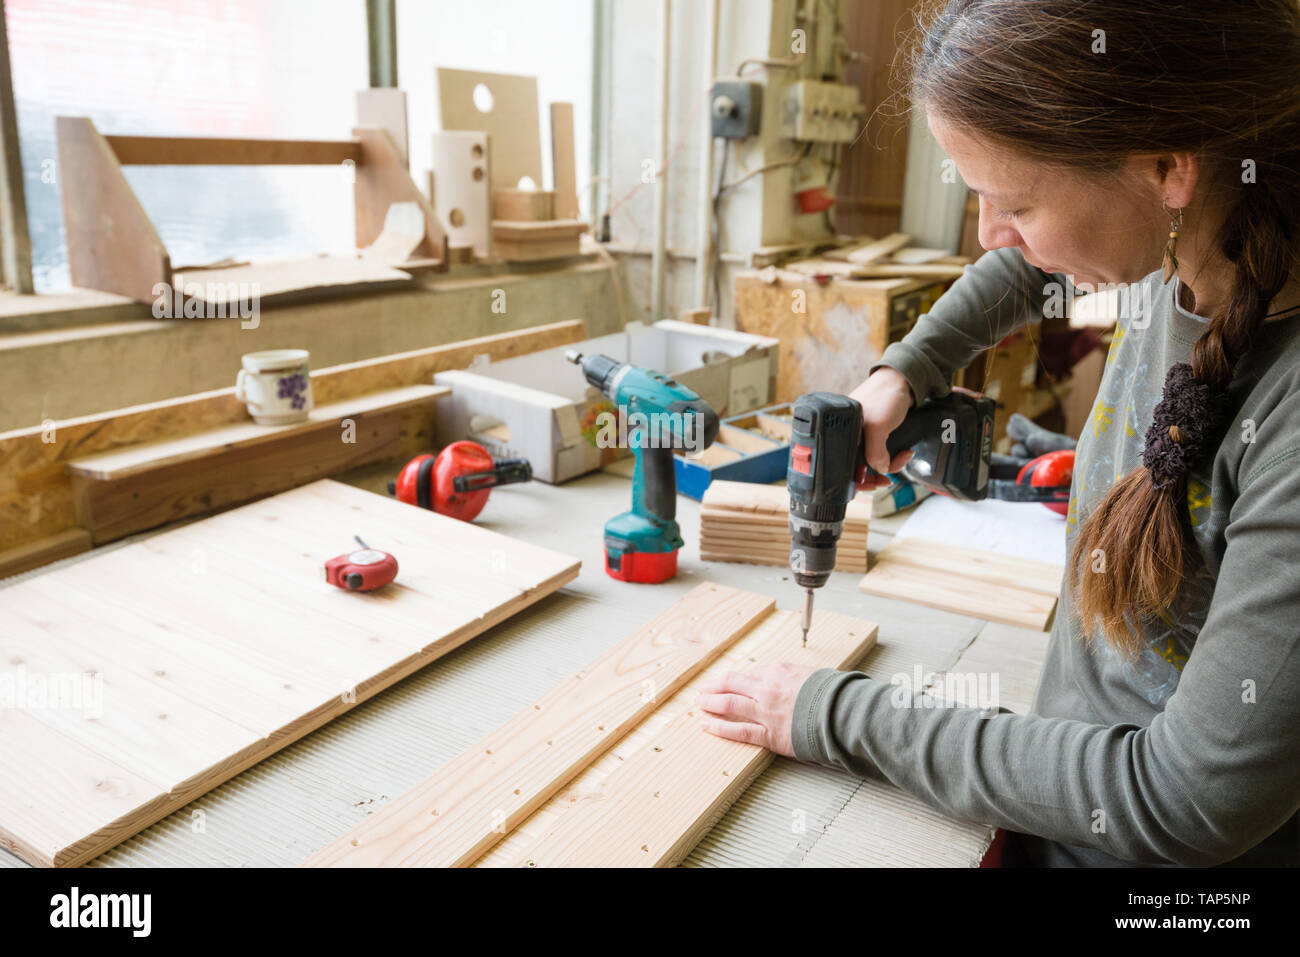 Young woman using electric screwdriver on a piece of wood at workshop Stock Photo